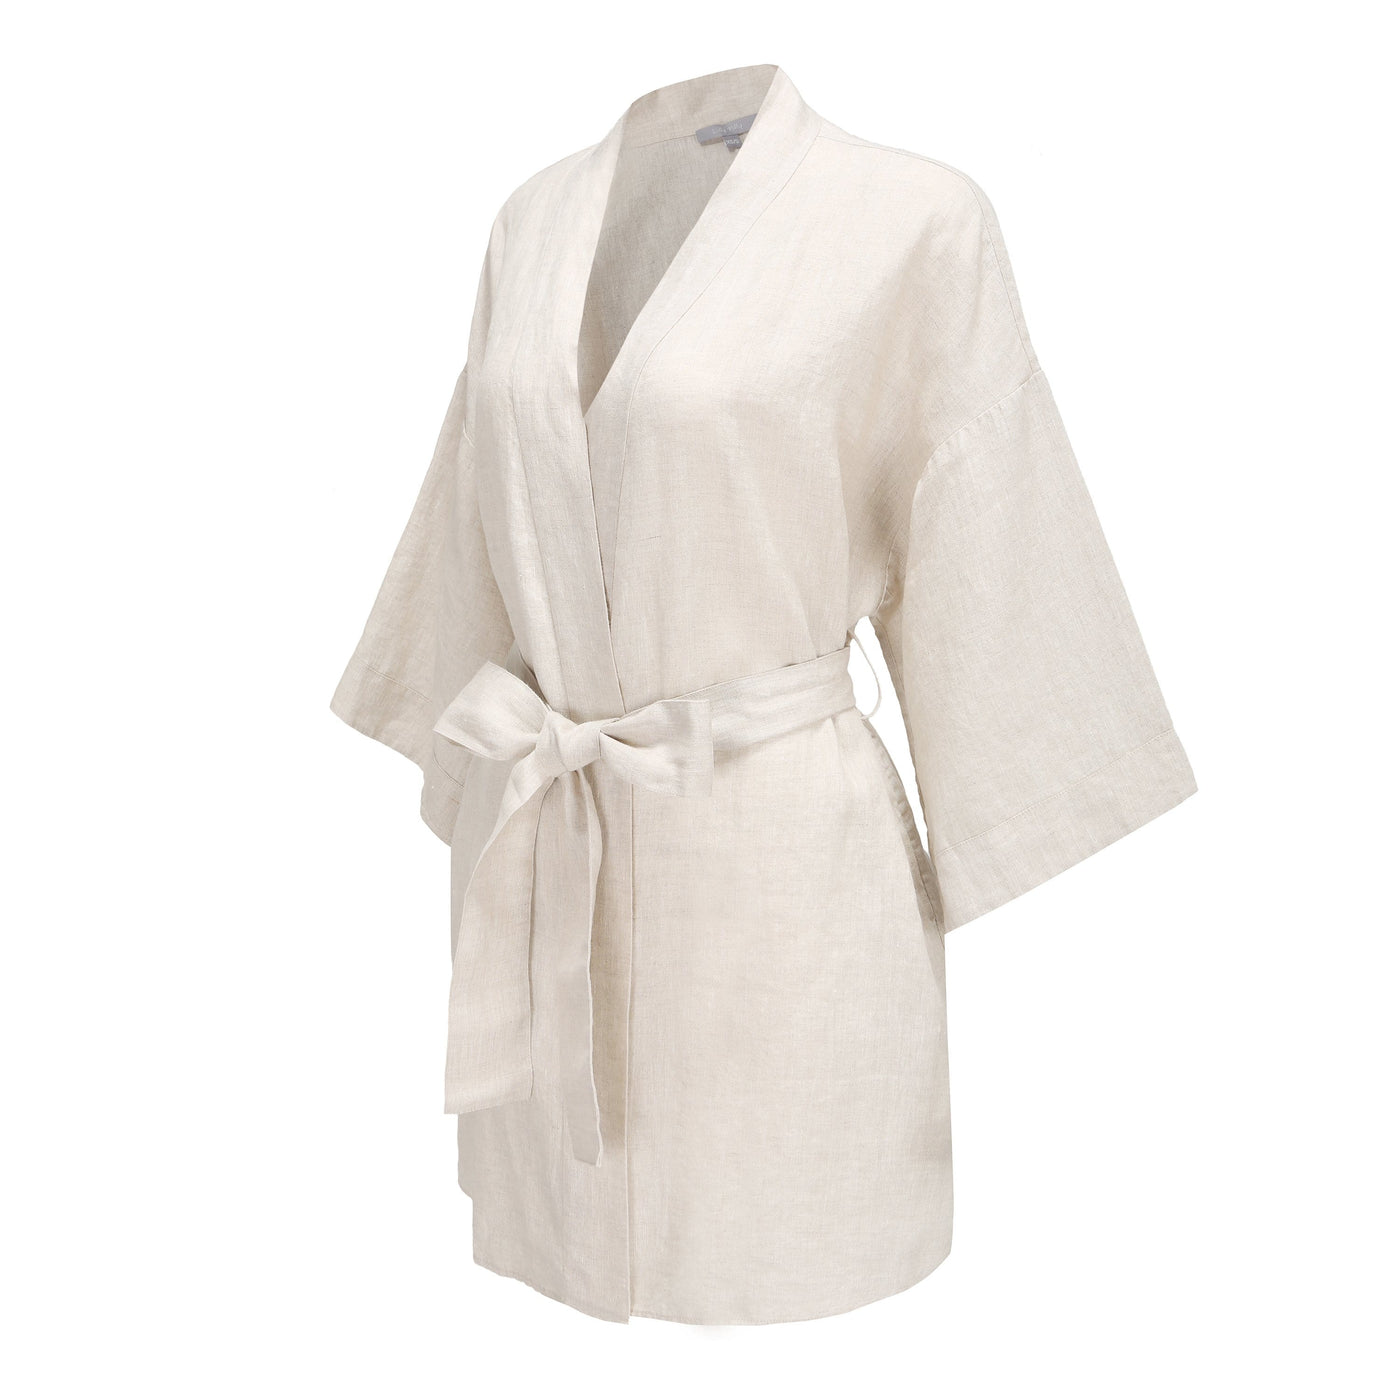 Lilly Pilly Collection 100% organic linen Summer Kimono in Oatmeal as 3D image showing side view